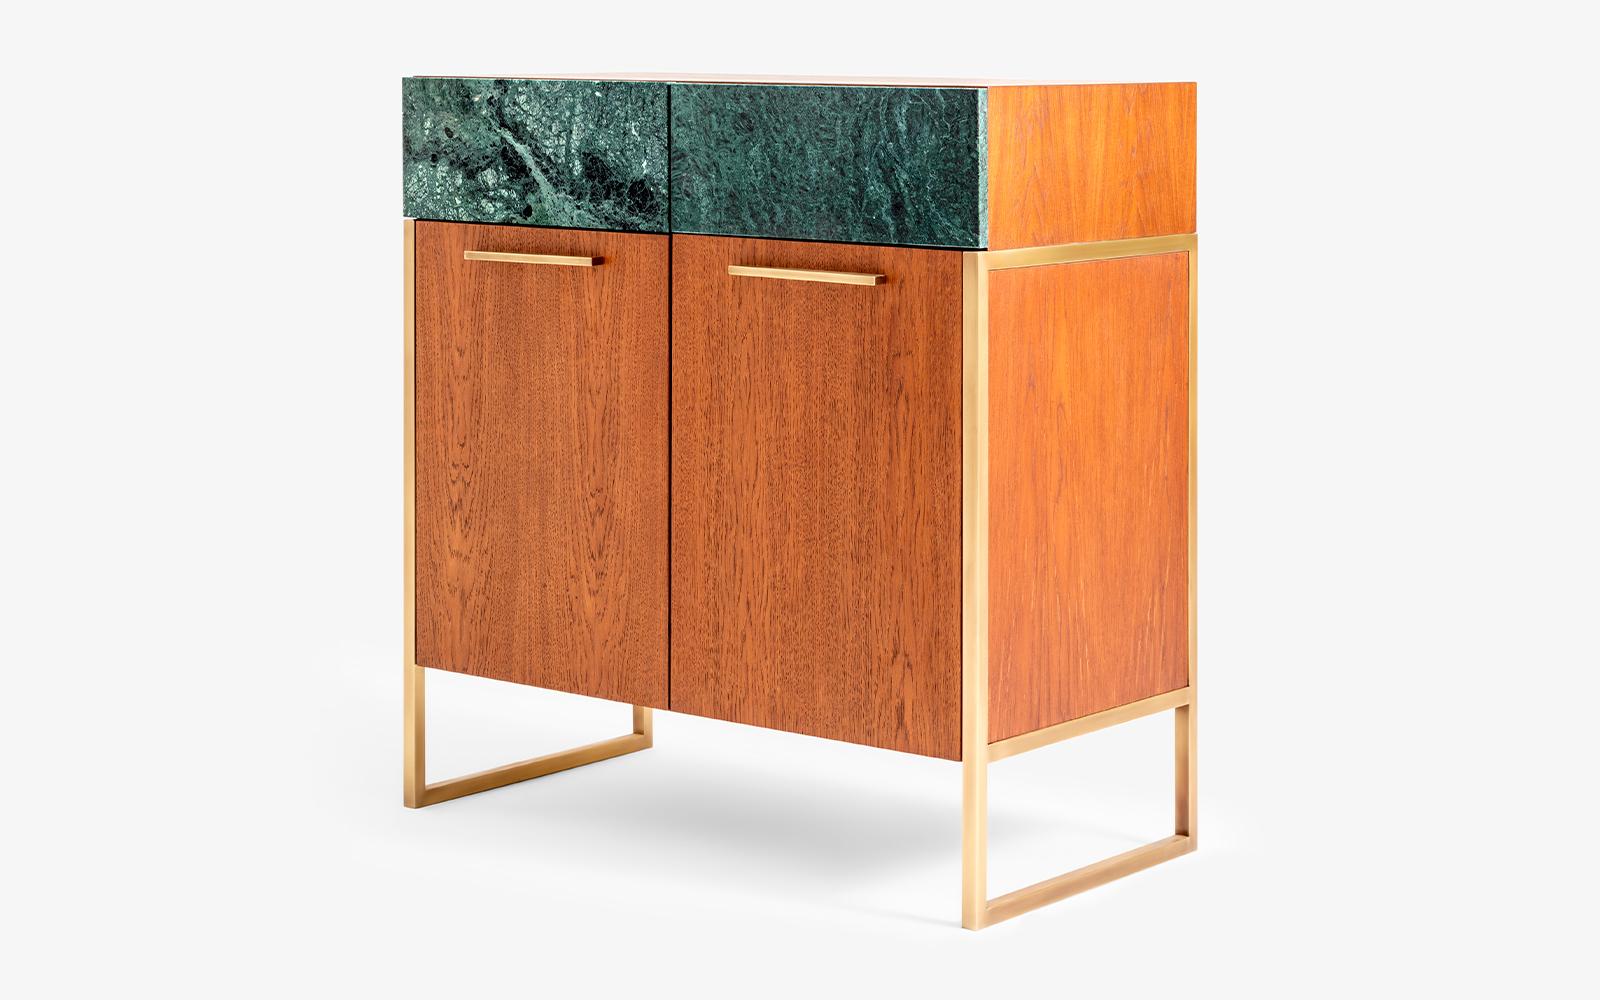 Famed modular console by Lagu
Designed by Ufuk Ceylan
Dimensions: W 84 x D 45 x H 90 cm
Materials: Brass, marble, oak, wood.

Offering the most elegant combination of first grade oak plated and rainforest marble, Famed console produces a